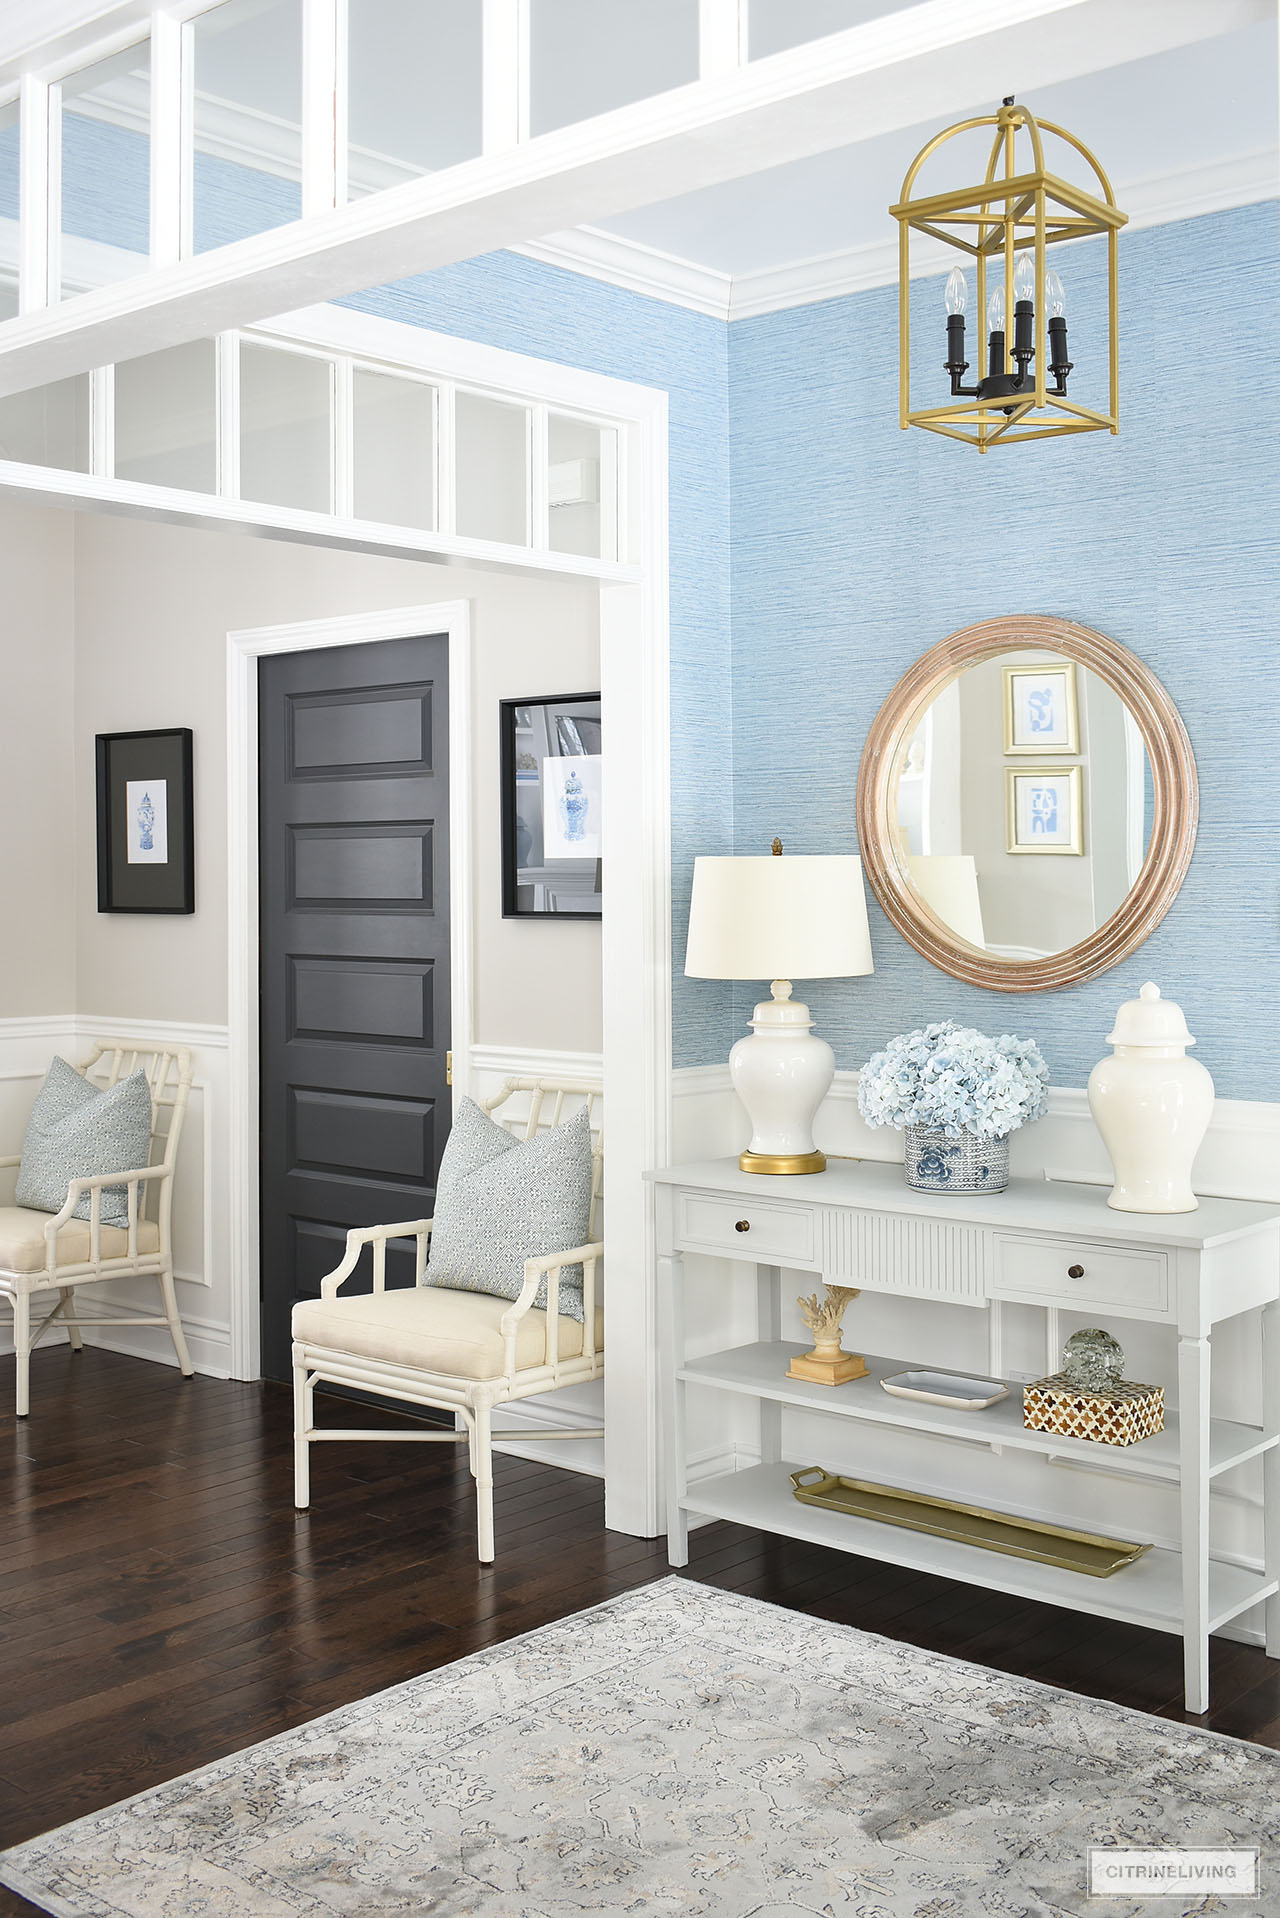 Entryway decorated for spring with a calming color platte using light blue white and natural coloured accessories.